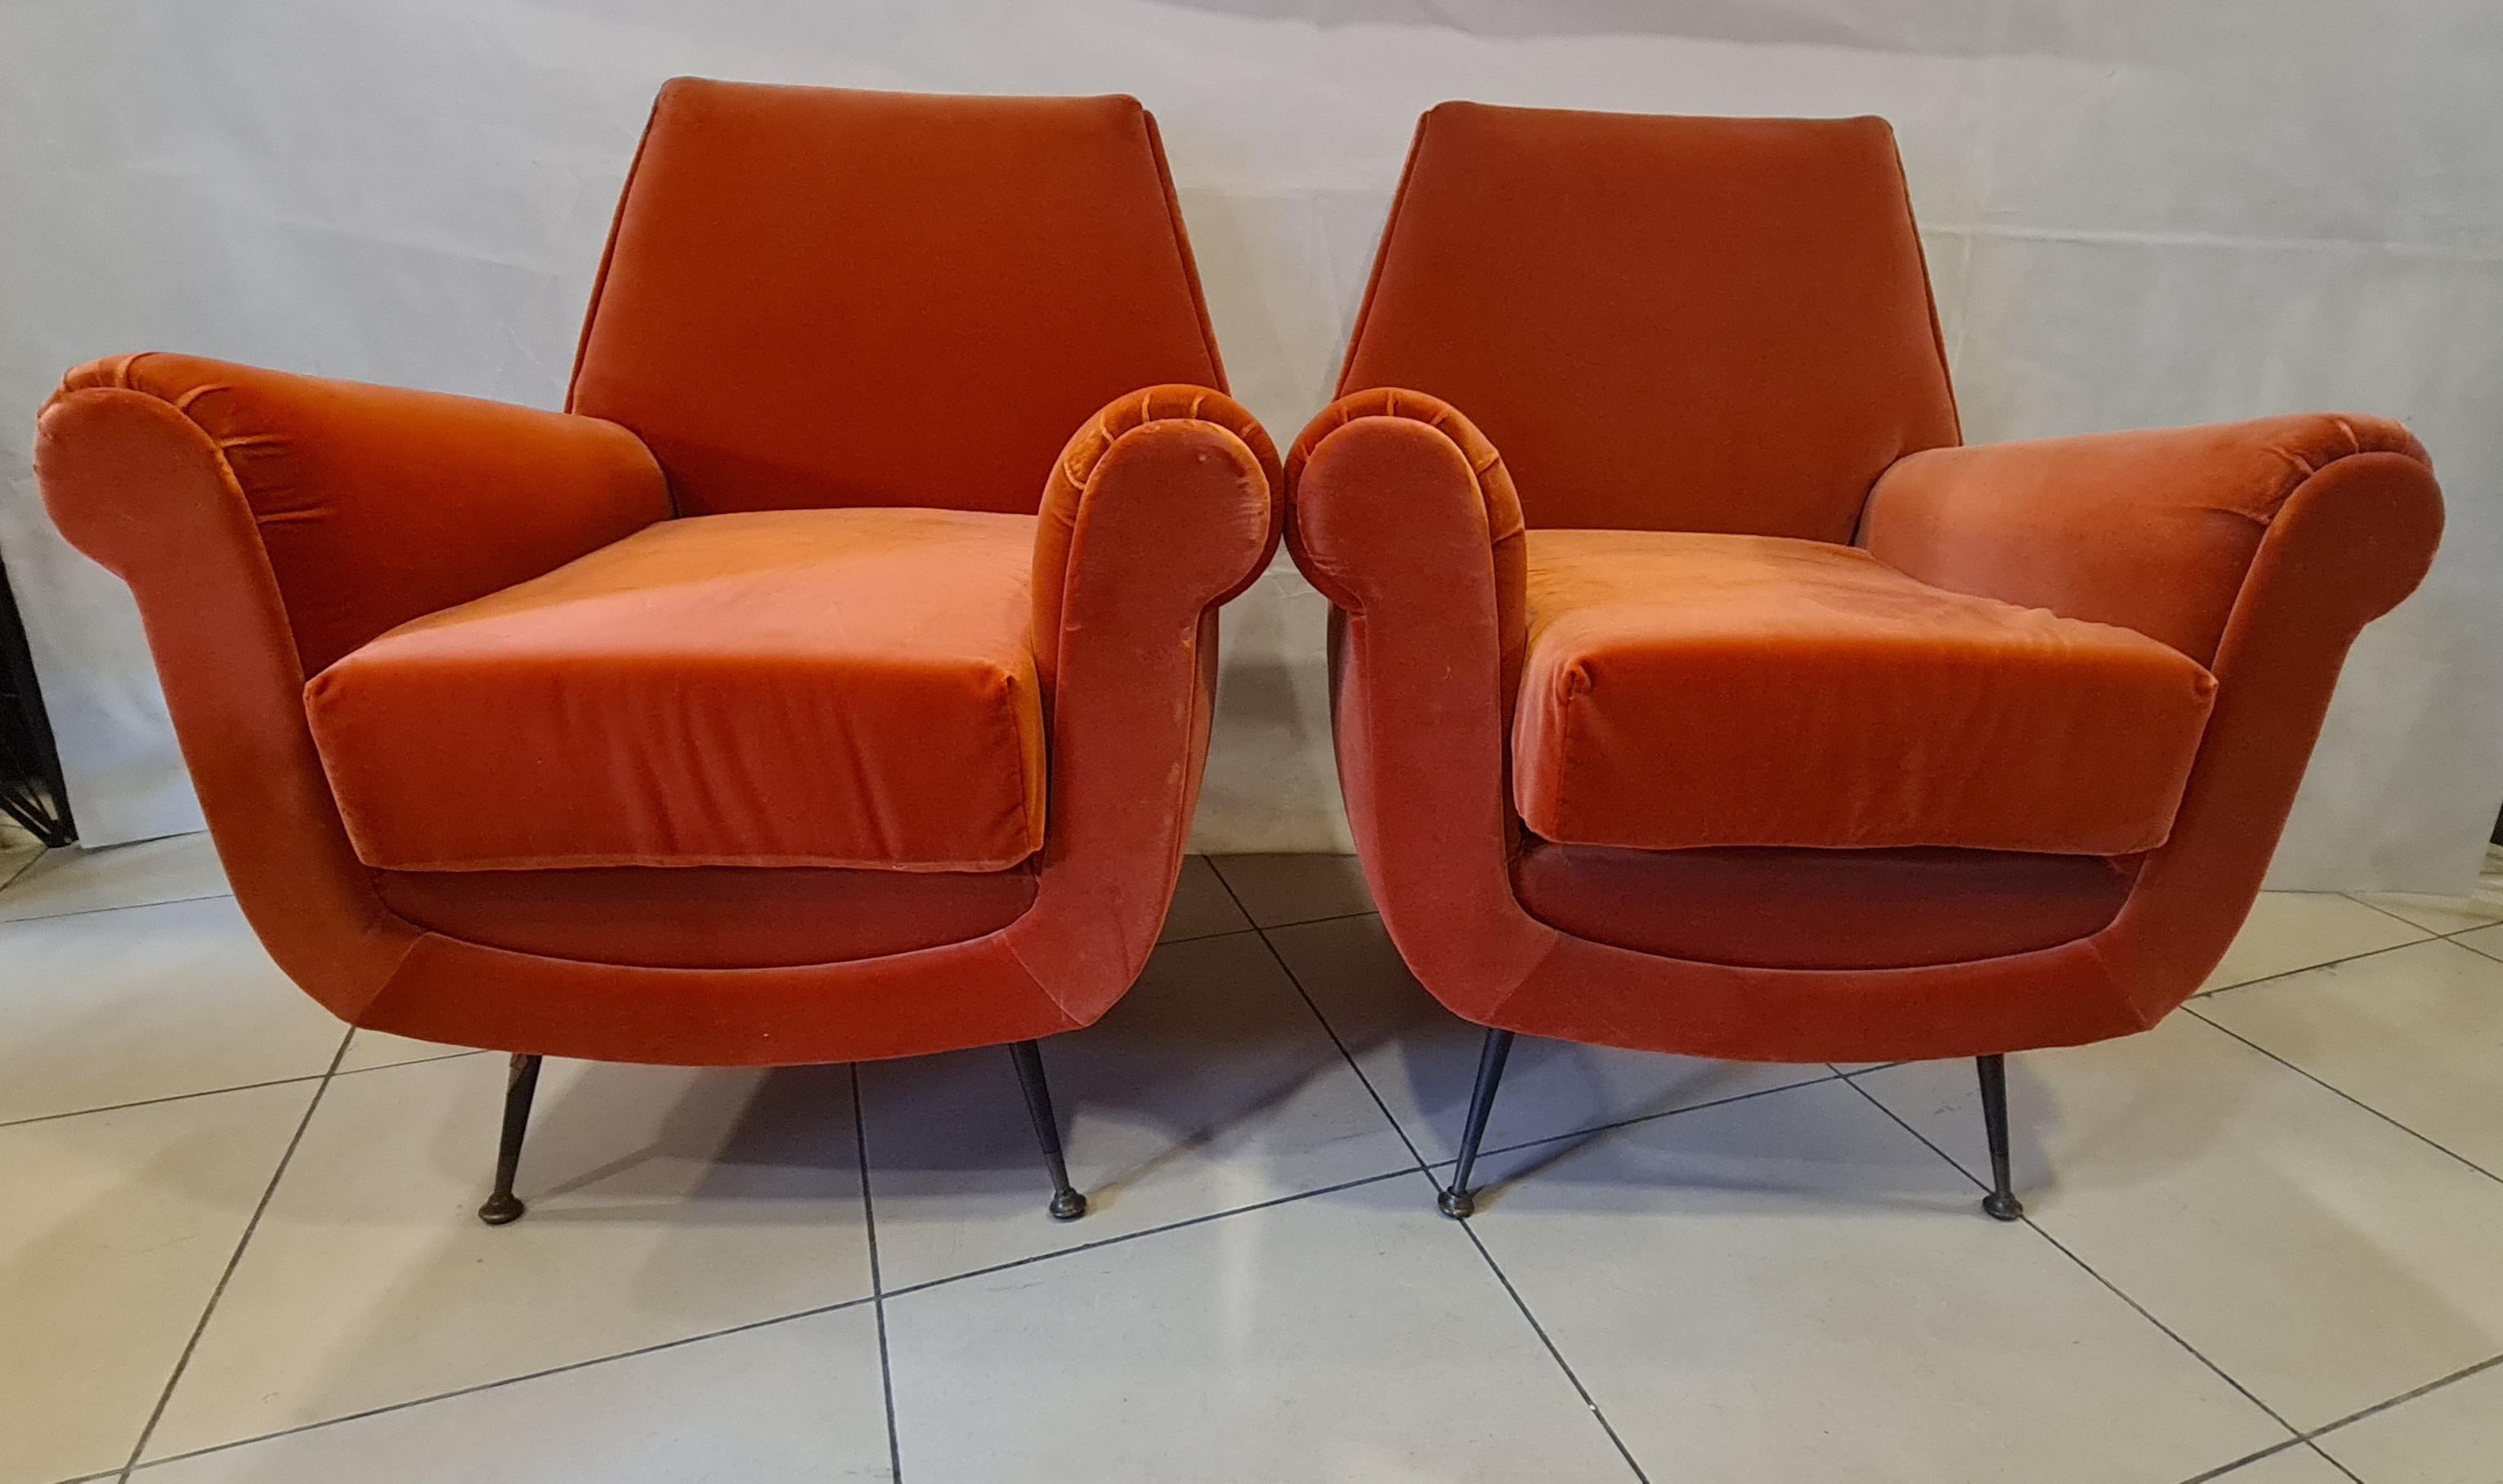 Pair of armchairs designed by designer Gigi Radice for Minotti.

Elegant and very comfortable retro-style armchairs with refined taste.

Carpeted in orange velvet, they do not go unnoticed and are ideal for adding light and vibrancy to your